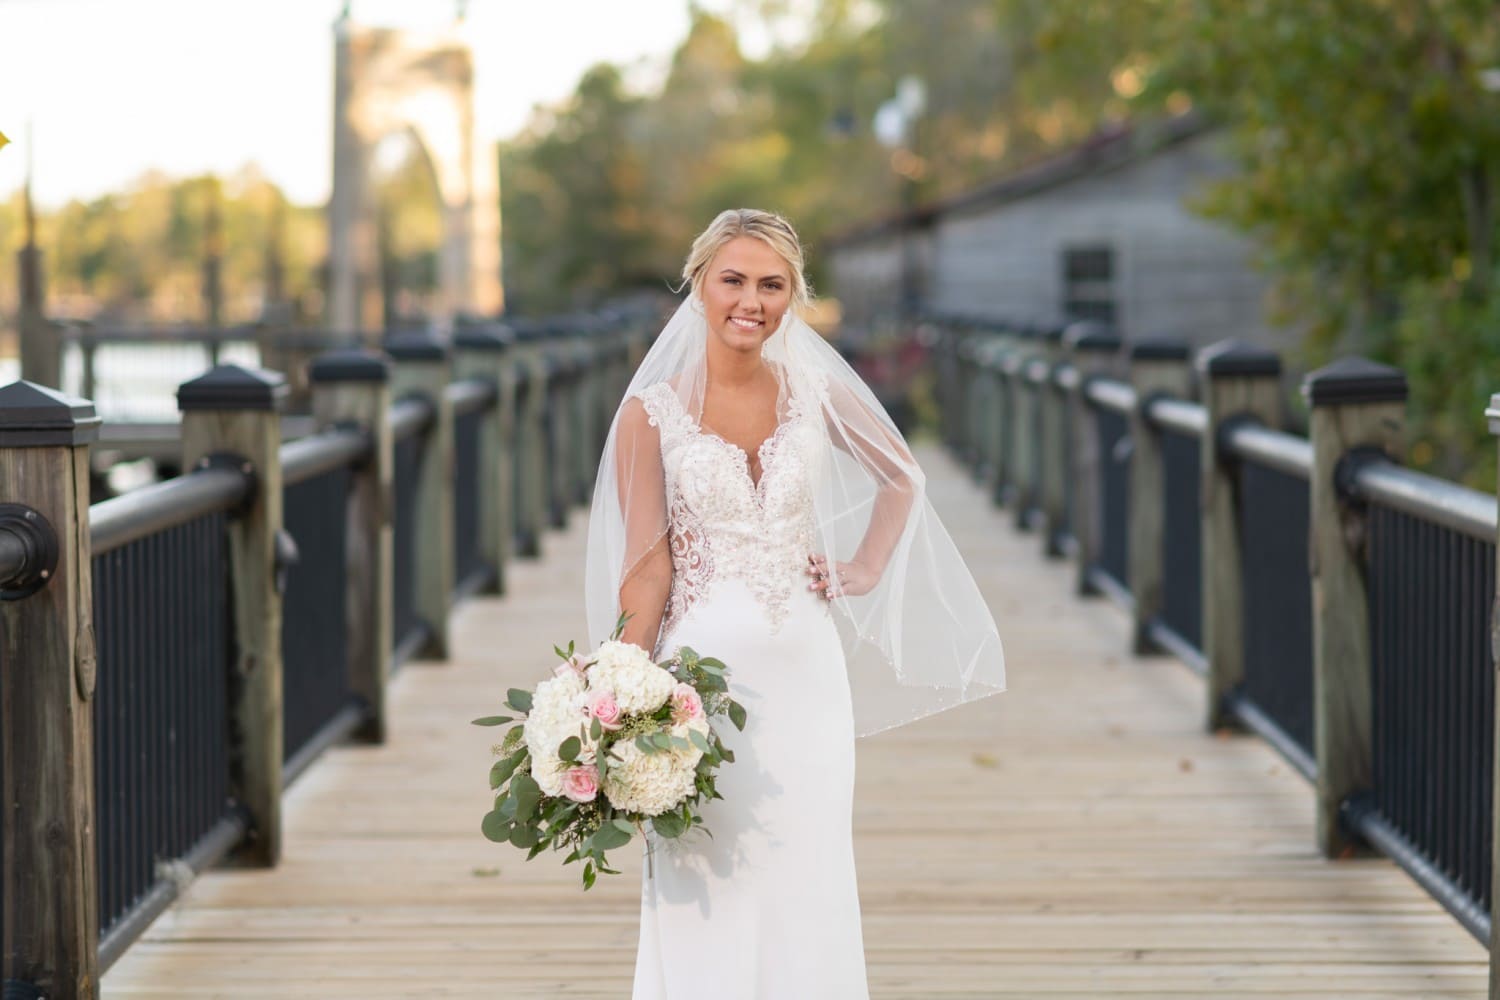 Bride holding bouquet on the boardwalk - Conway River Walk